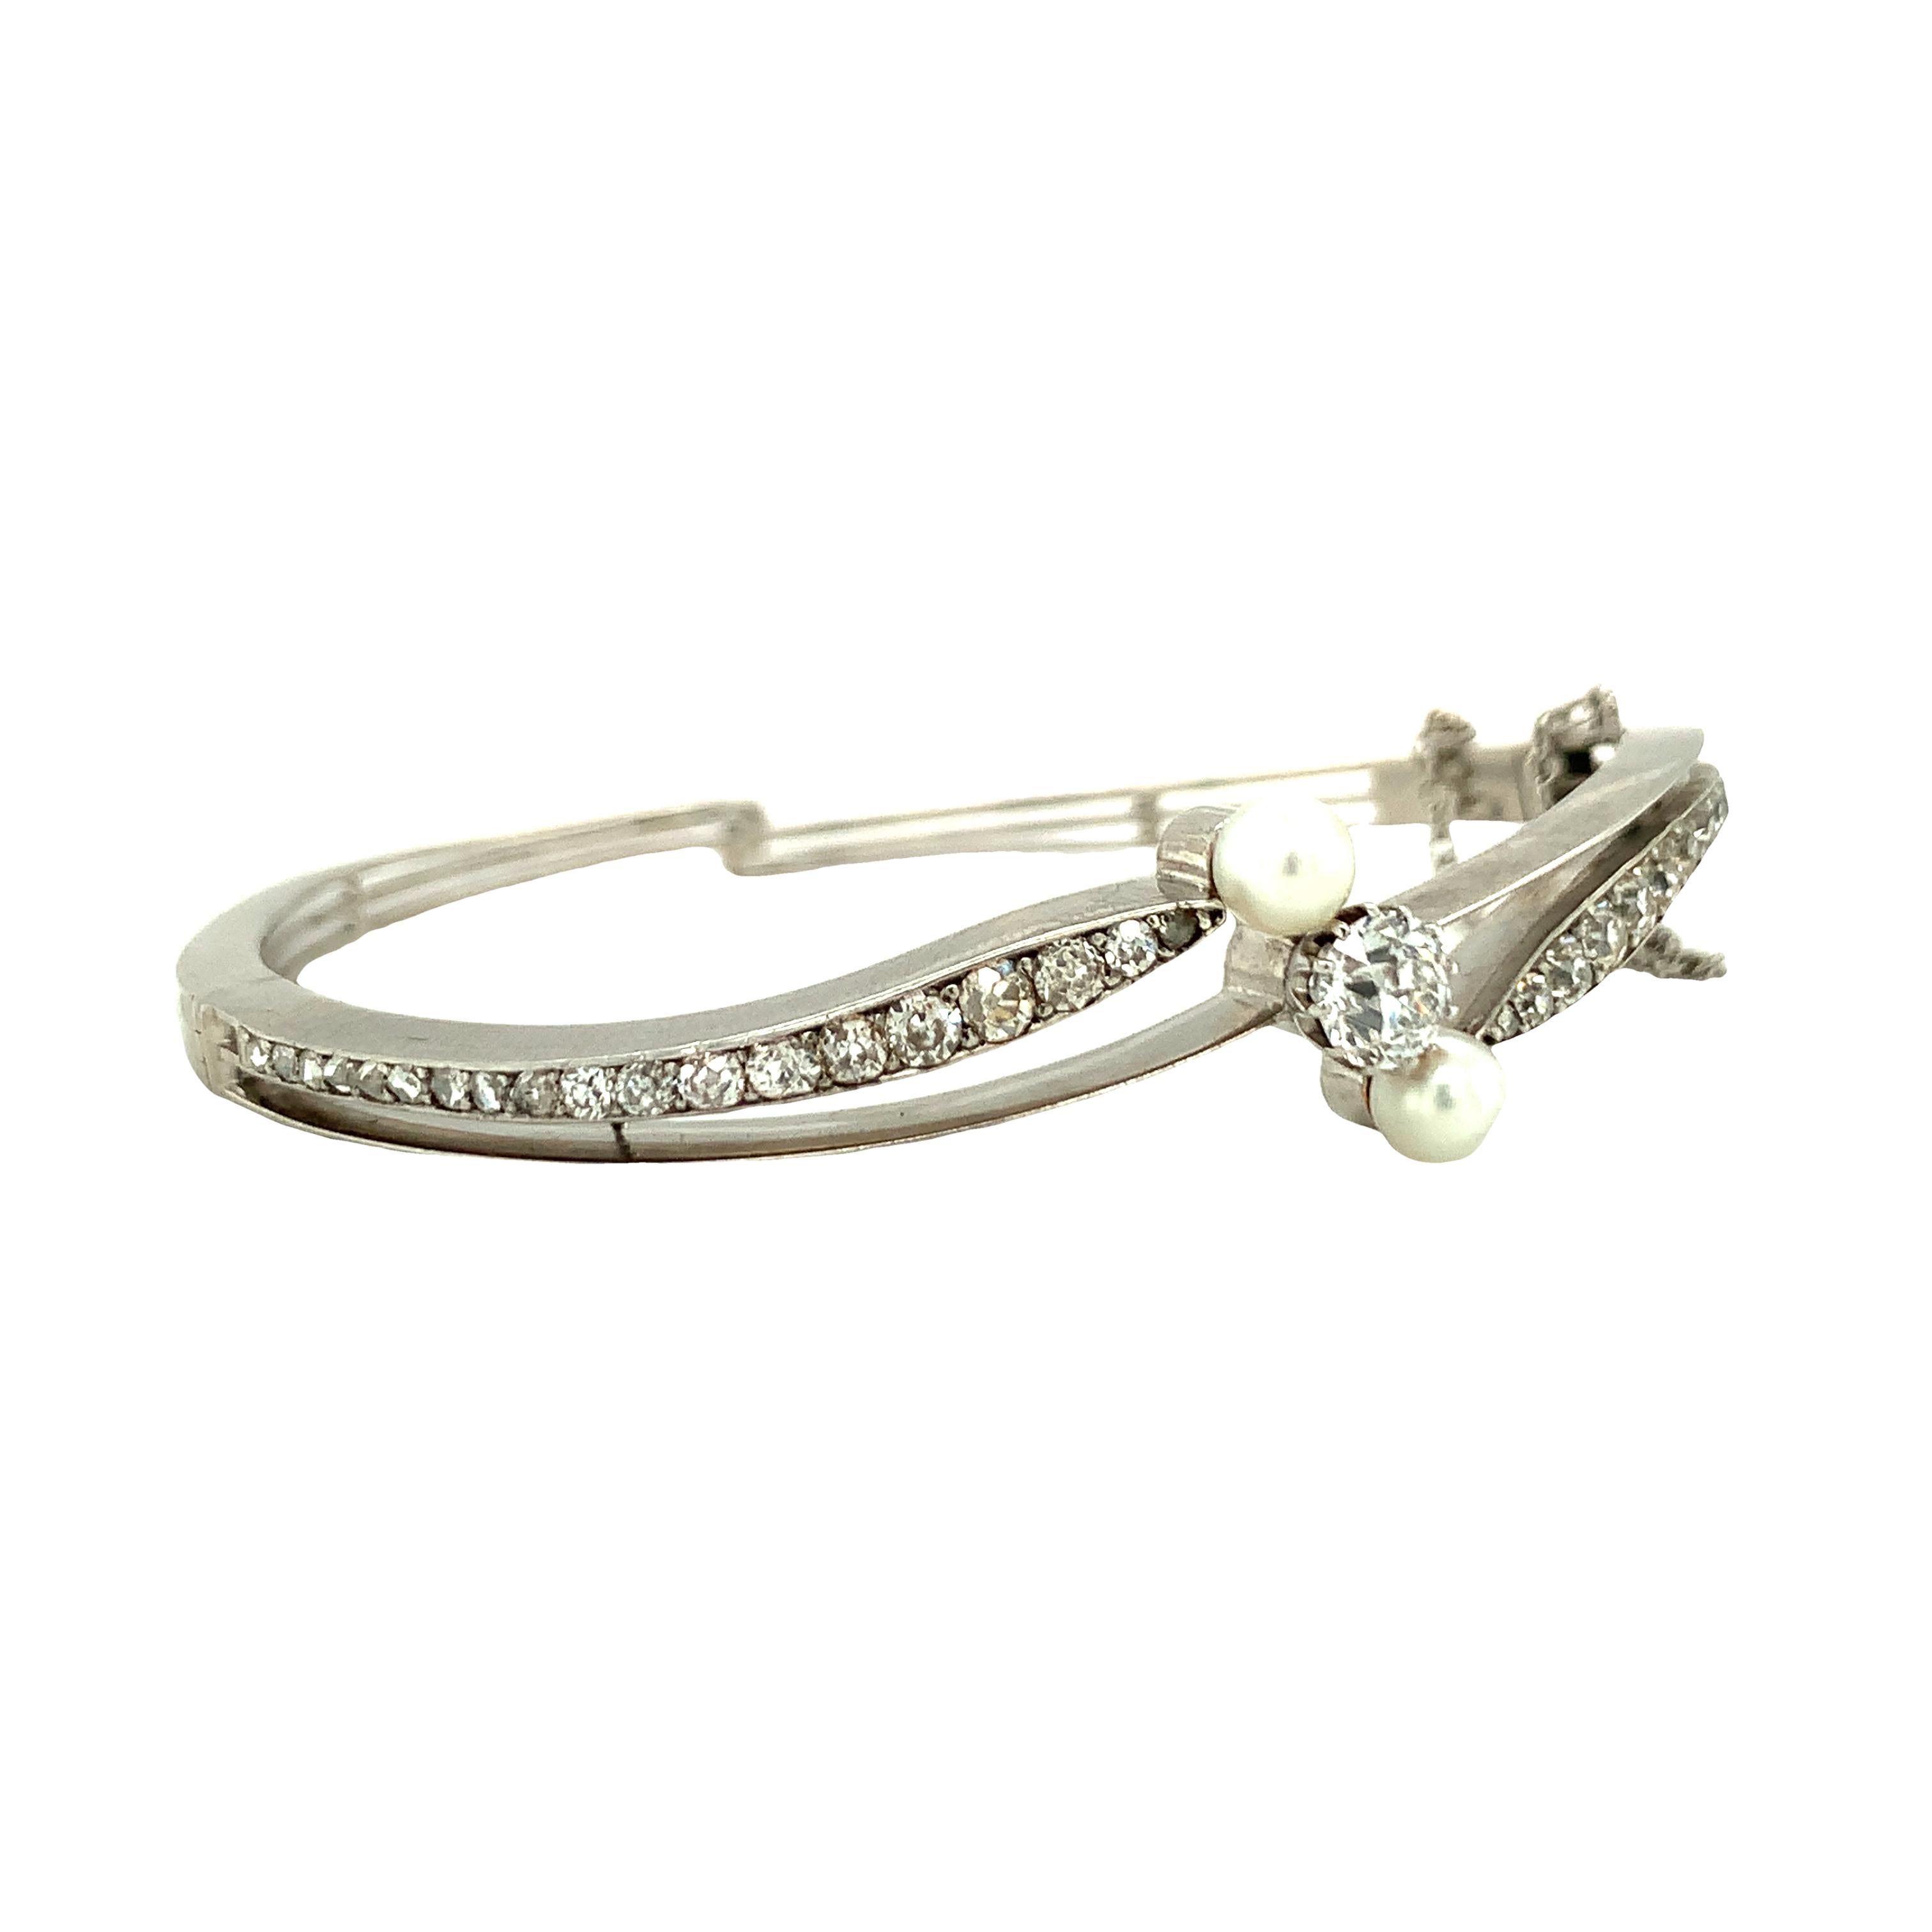 One Victorian 14K white gold diamond and pearl bangle bracelet featuring 29 old European cut diamonds totaling 0.80 ct. with J-K color and SI-2 clarity.  Two white cultured round pearls measuring 4.5 mm. in diameter each.  Bracelet measures 15 mm.